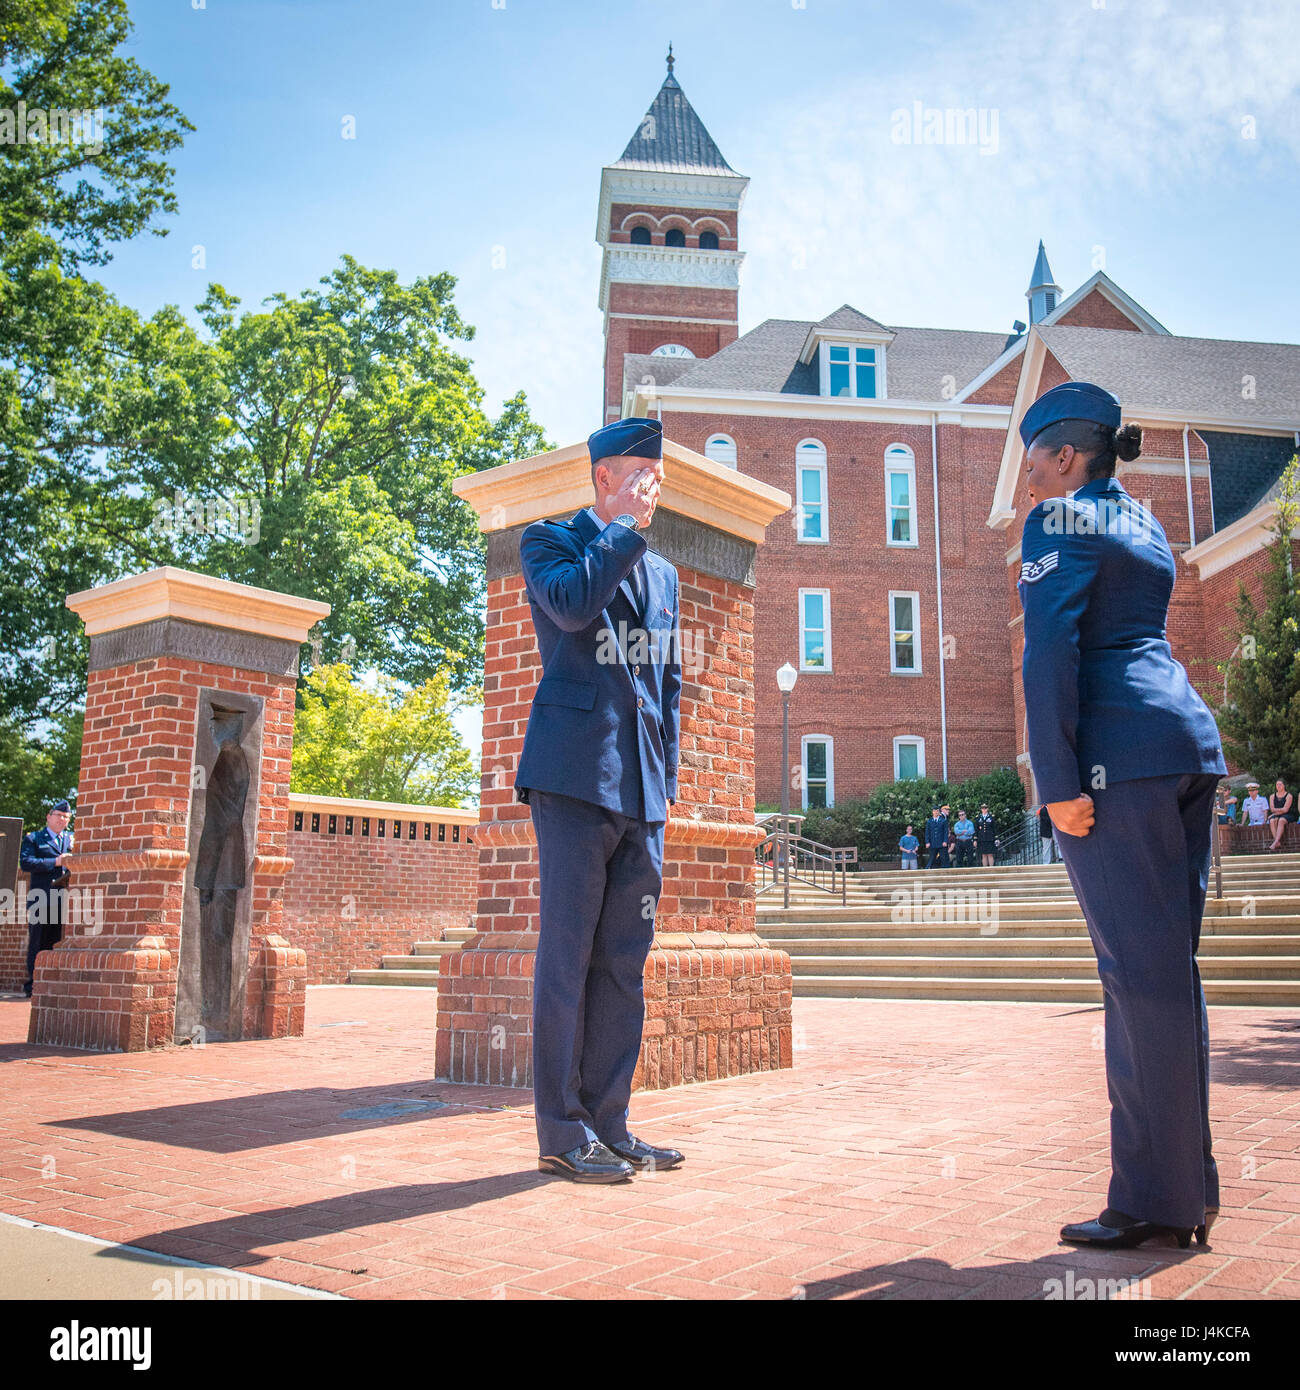 Newly-commissioned U.S. Air Force 2nd Lt. Sean Mac Lain (left) recieves his first salute during a Silver Dollar Ceremony after the Clemson University Reserve Officers’ Training Corps commissioning ceremony, May 10, 2017. Mac Lain was a member of both the 2016 Clemson football National Championship team and the Clemson Pershing Rifles 2016 National Champion drill and ceremony squad. (U.S. Army Reserve photo by Staff Sgt. Ken Scar) Stock Photo